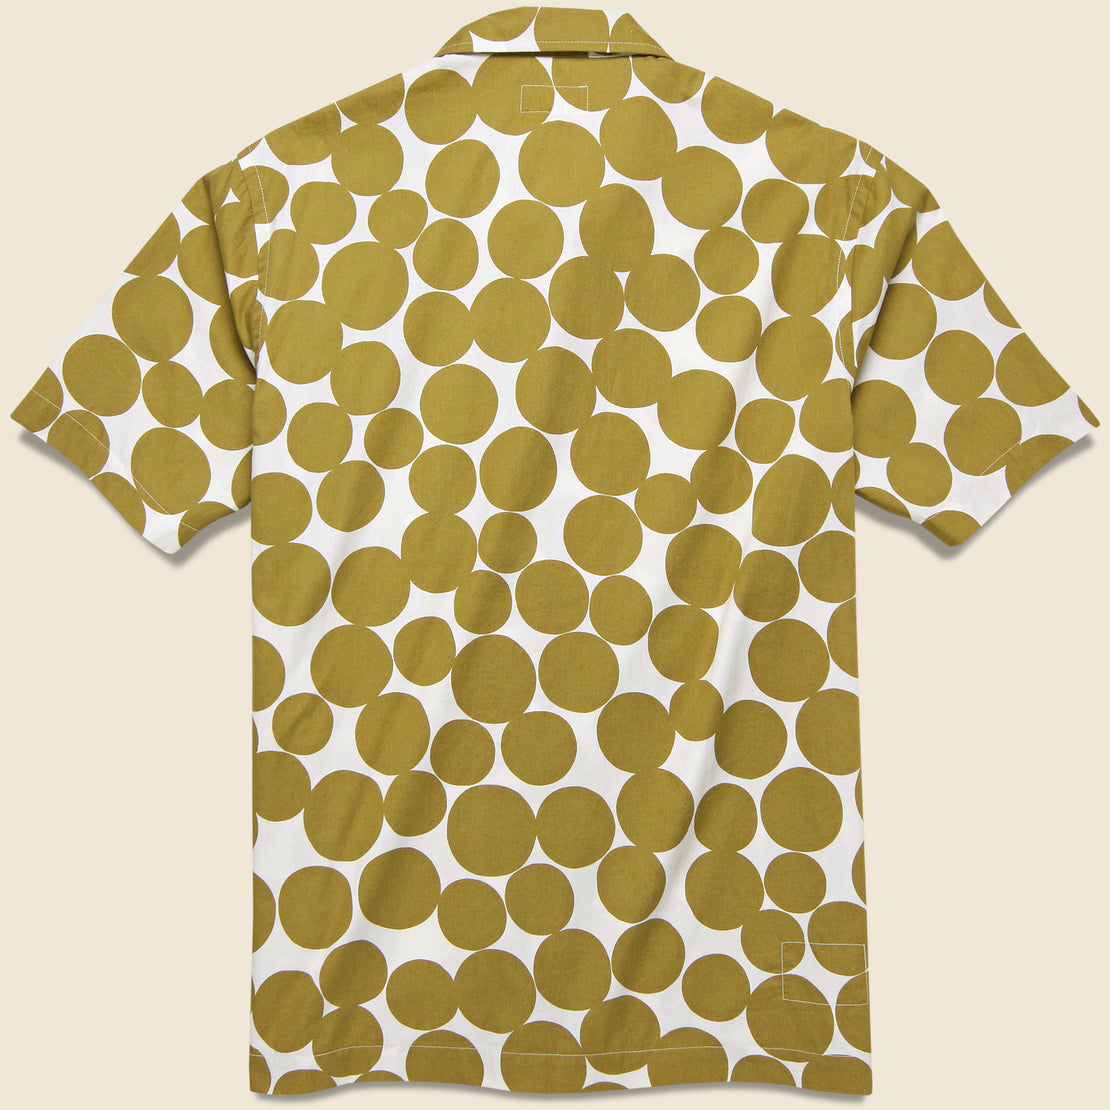 Dot Print Road Shirt - Gold - Universal Works - STAG Provisions - Tops - S/S Woven - Dot